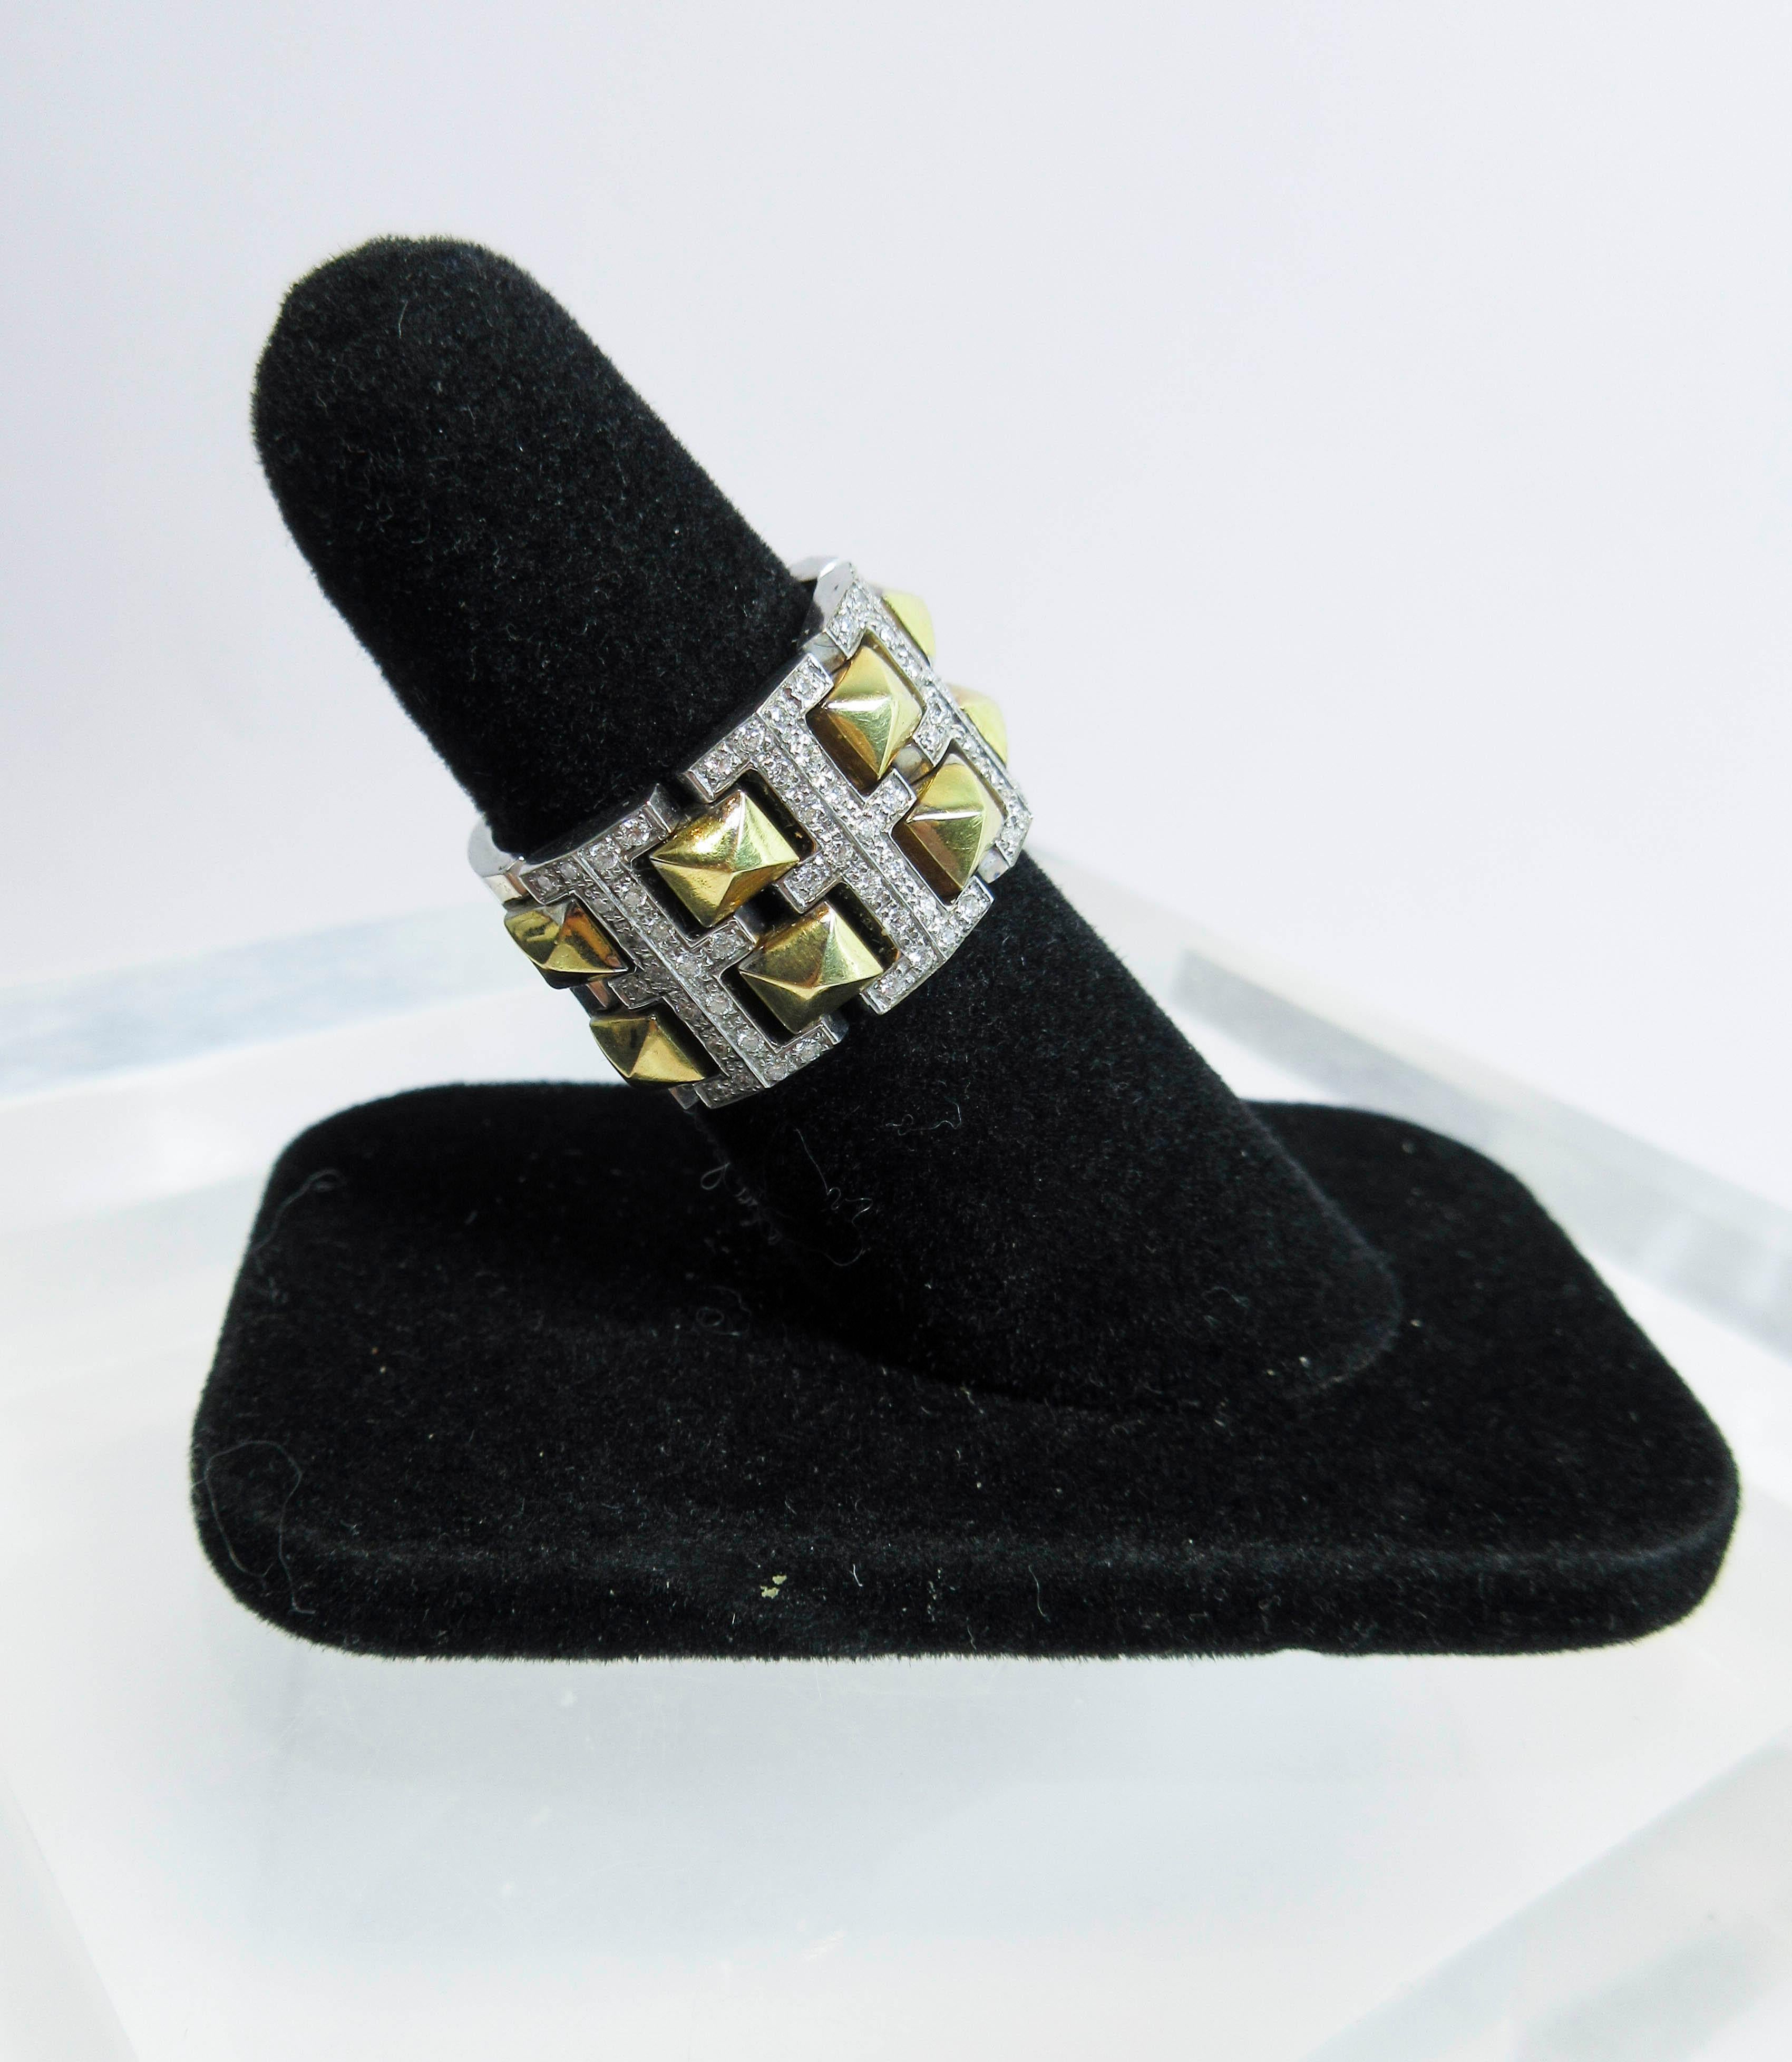 Versace 18 Karat White and Yellow Gold with Diamond Accents For Sale 5